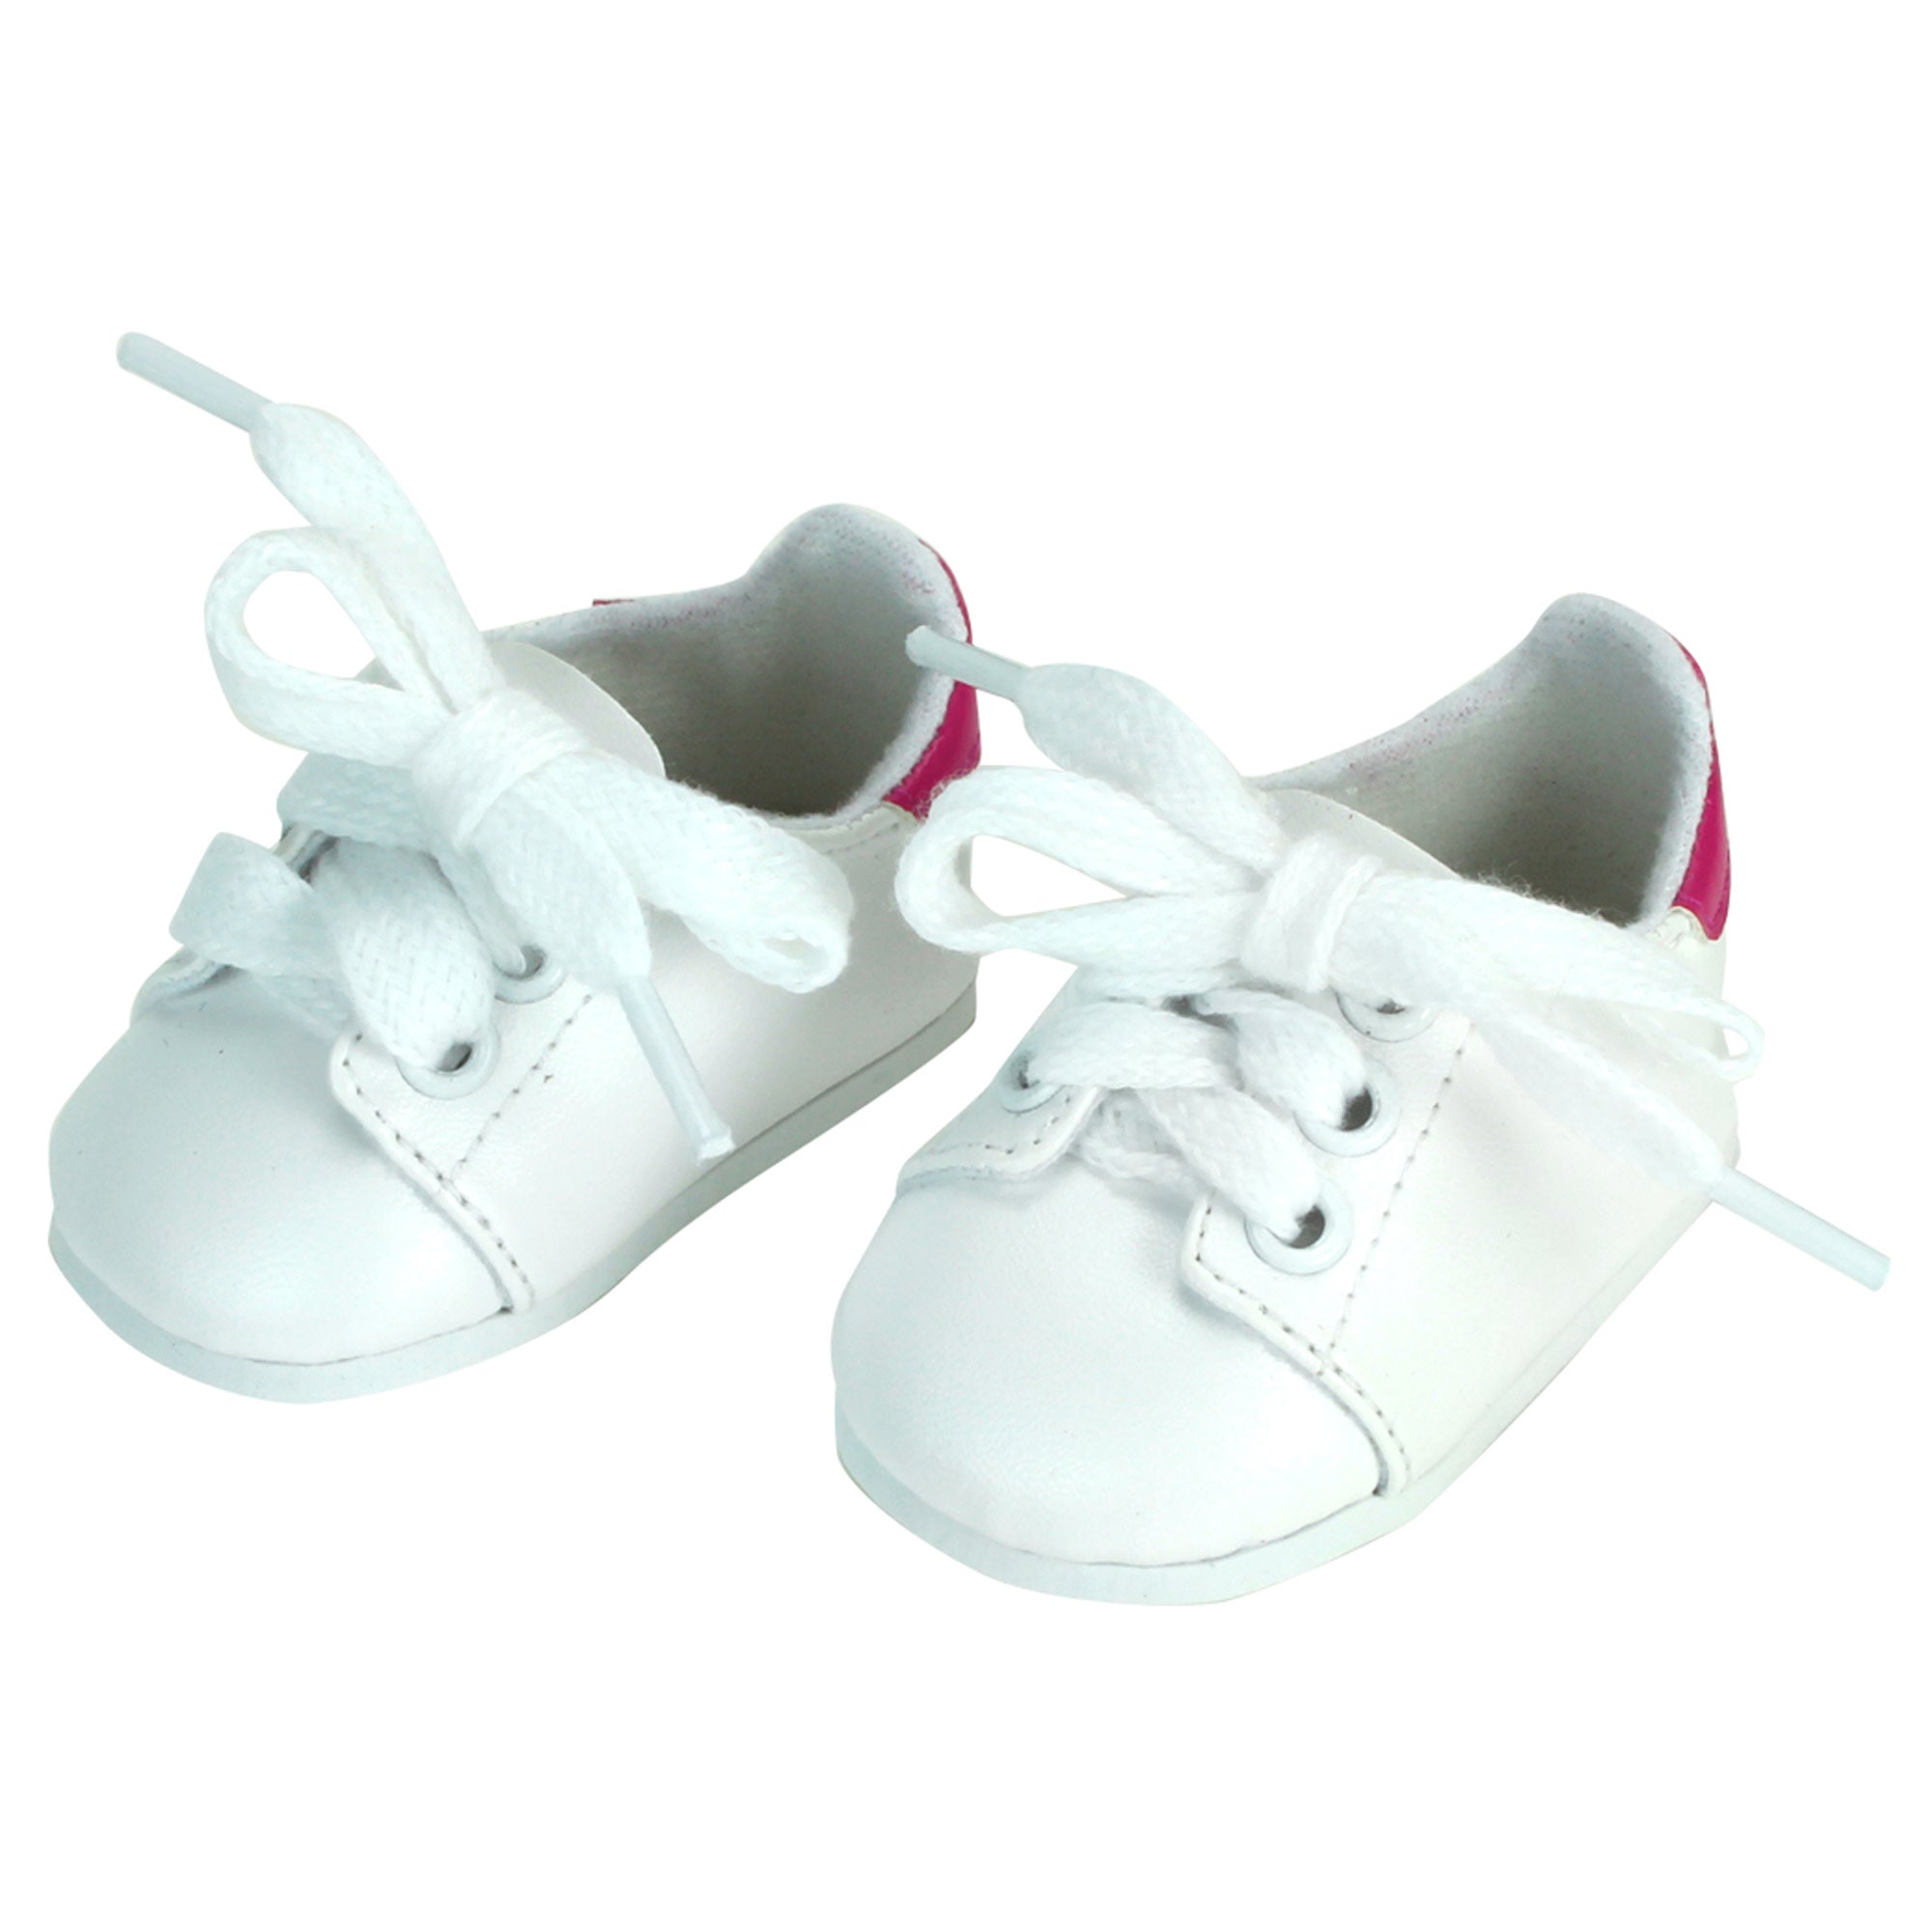 Sophia’s Basic Mix & Match Gender-Neutral Classic Wardrobe Staple Faux Leather Sneaker Tennis Shoes for 18” Dolls, White